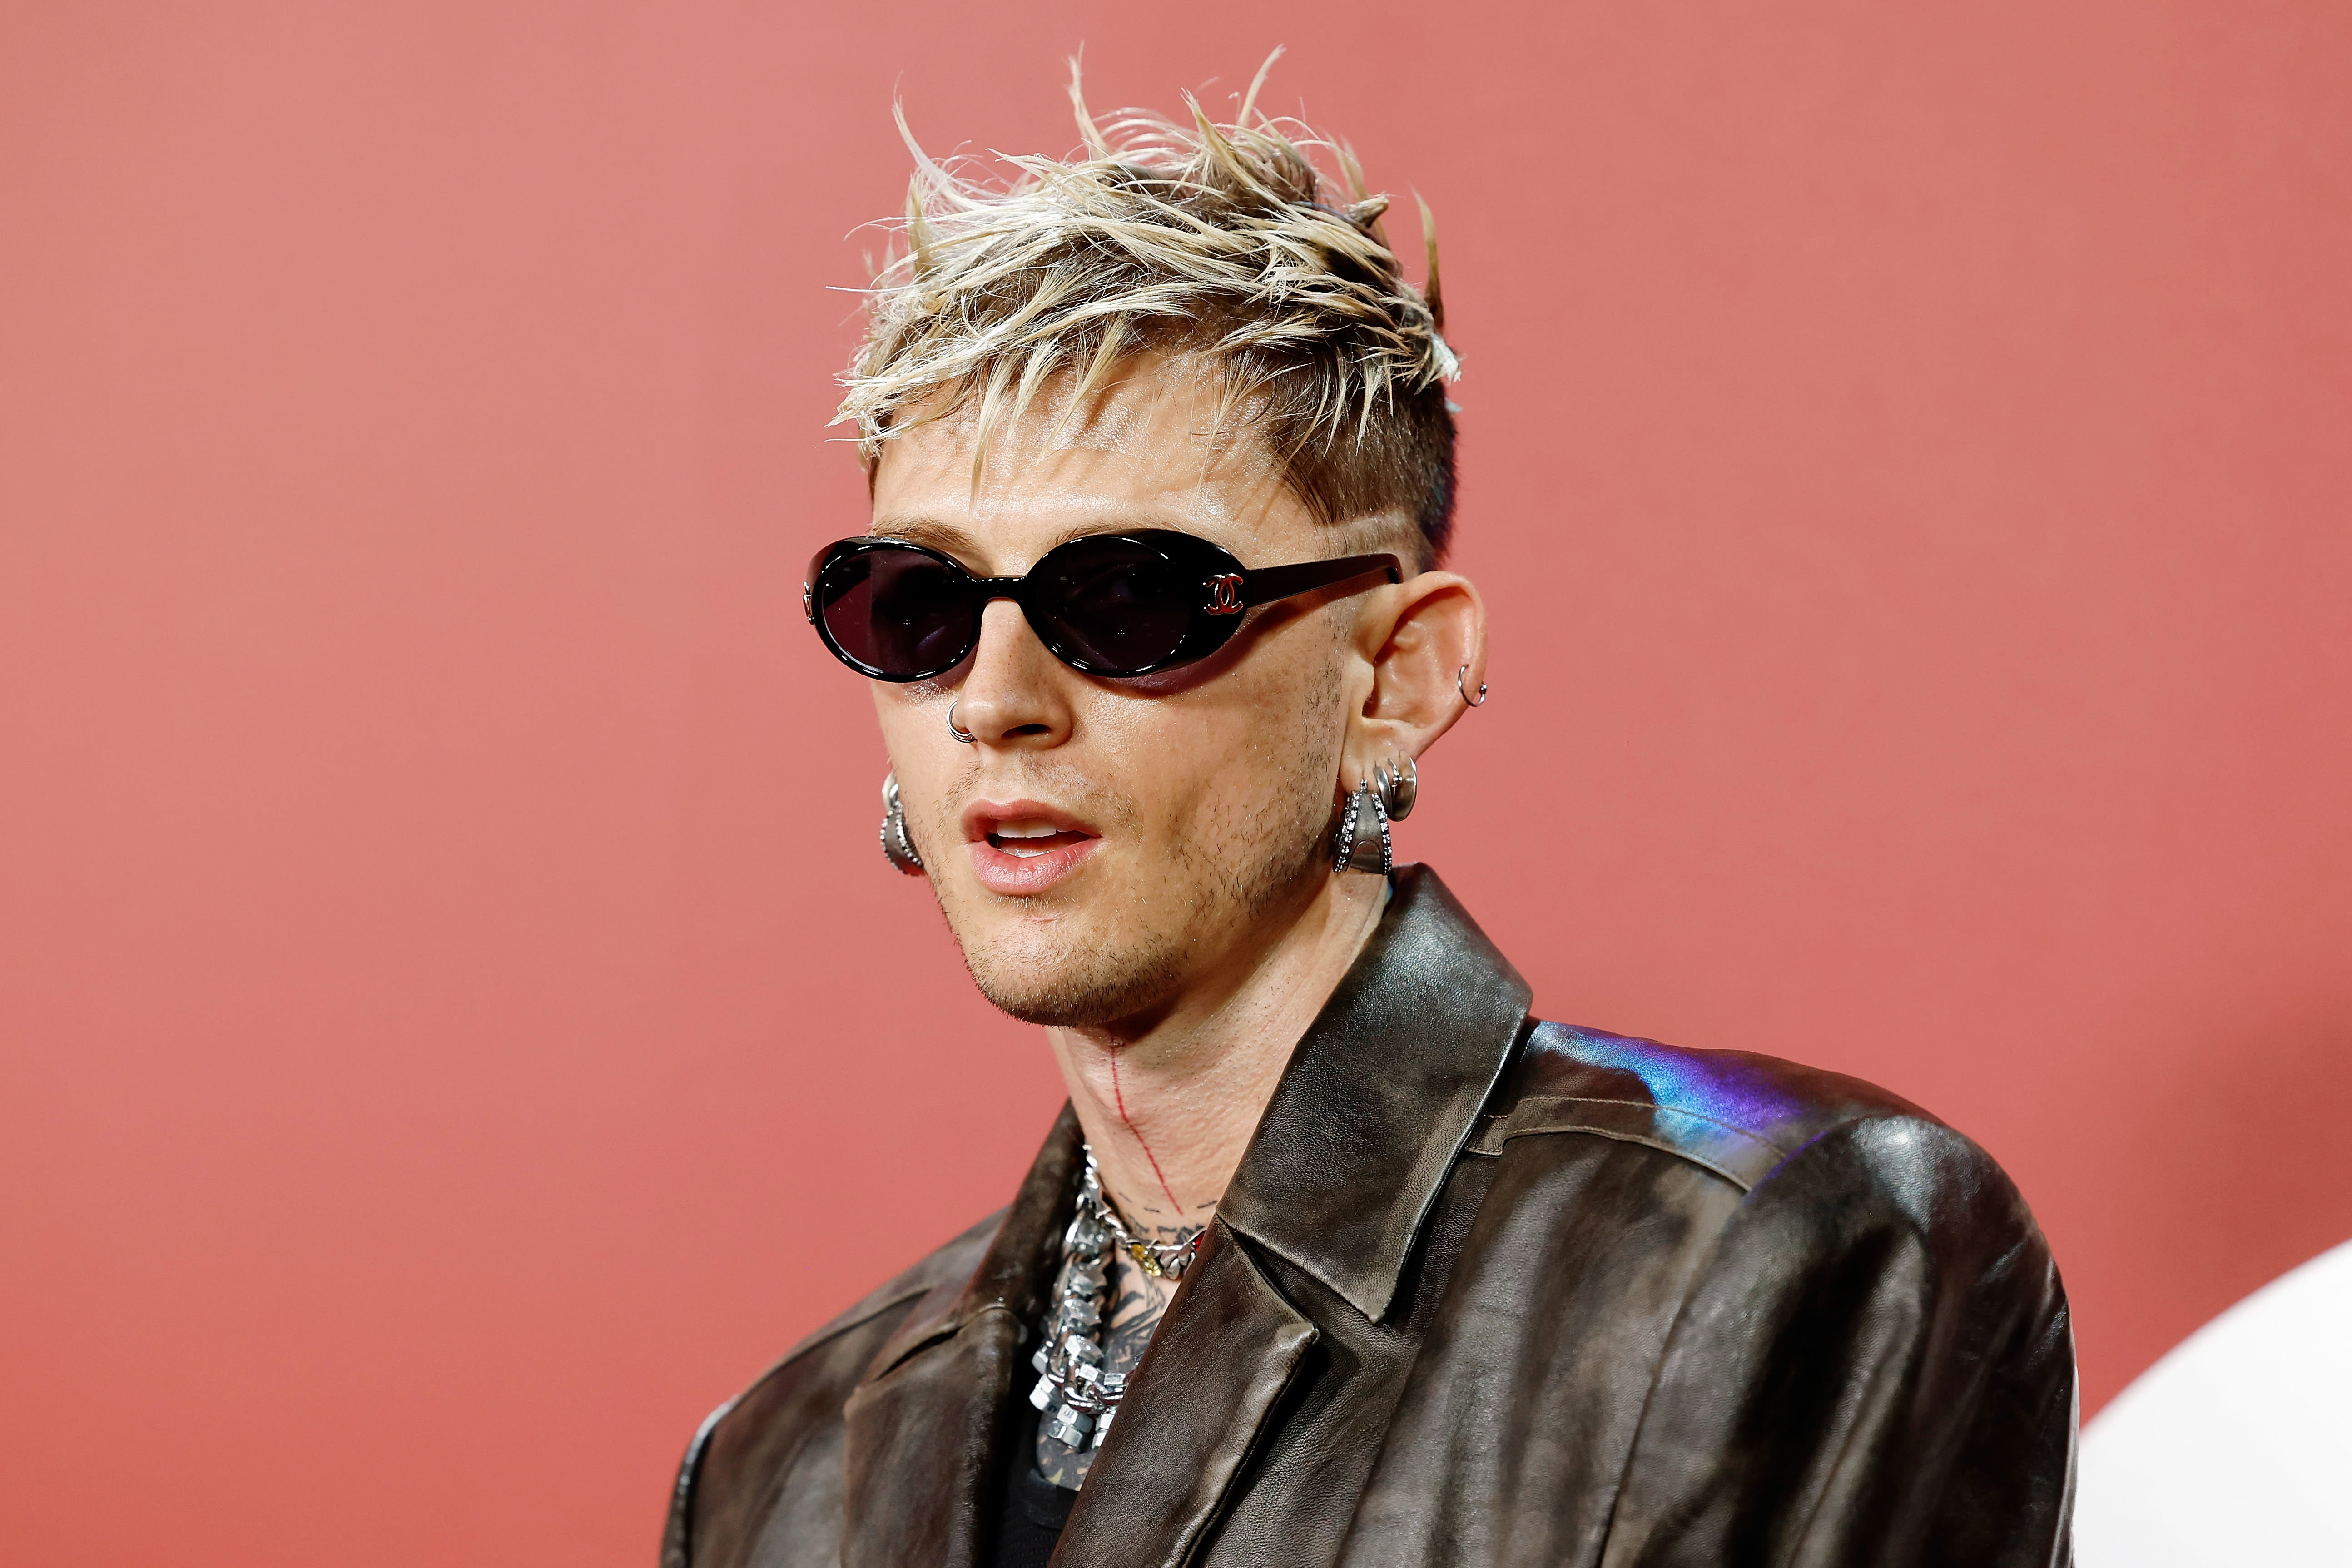 MGK Enlists Jelly Roll for John Denver-Inspired New Single ‘Lonely Road’